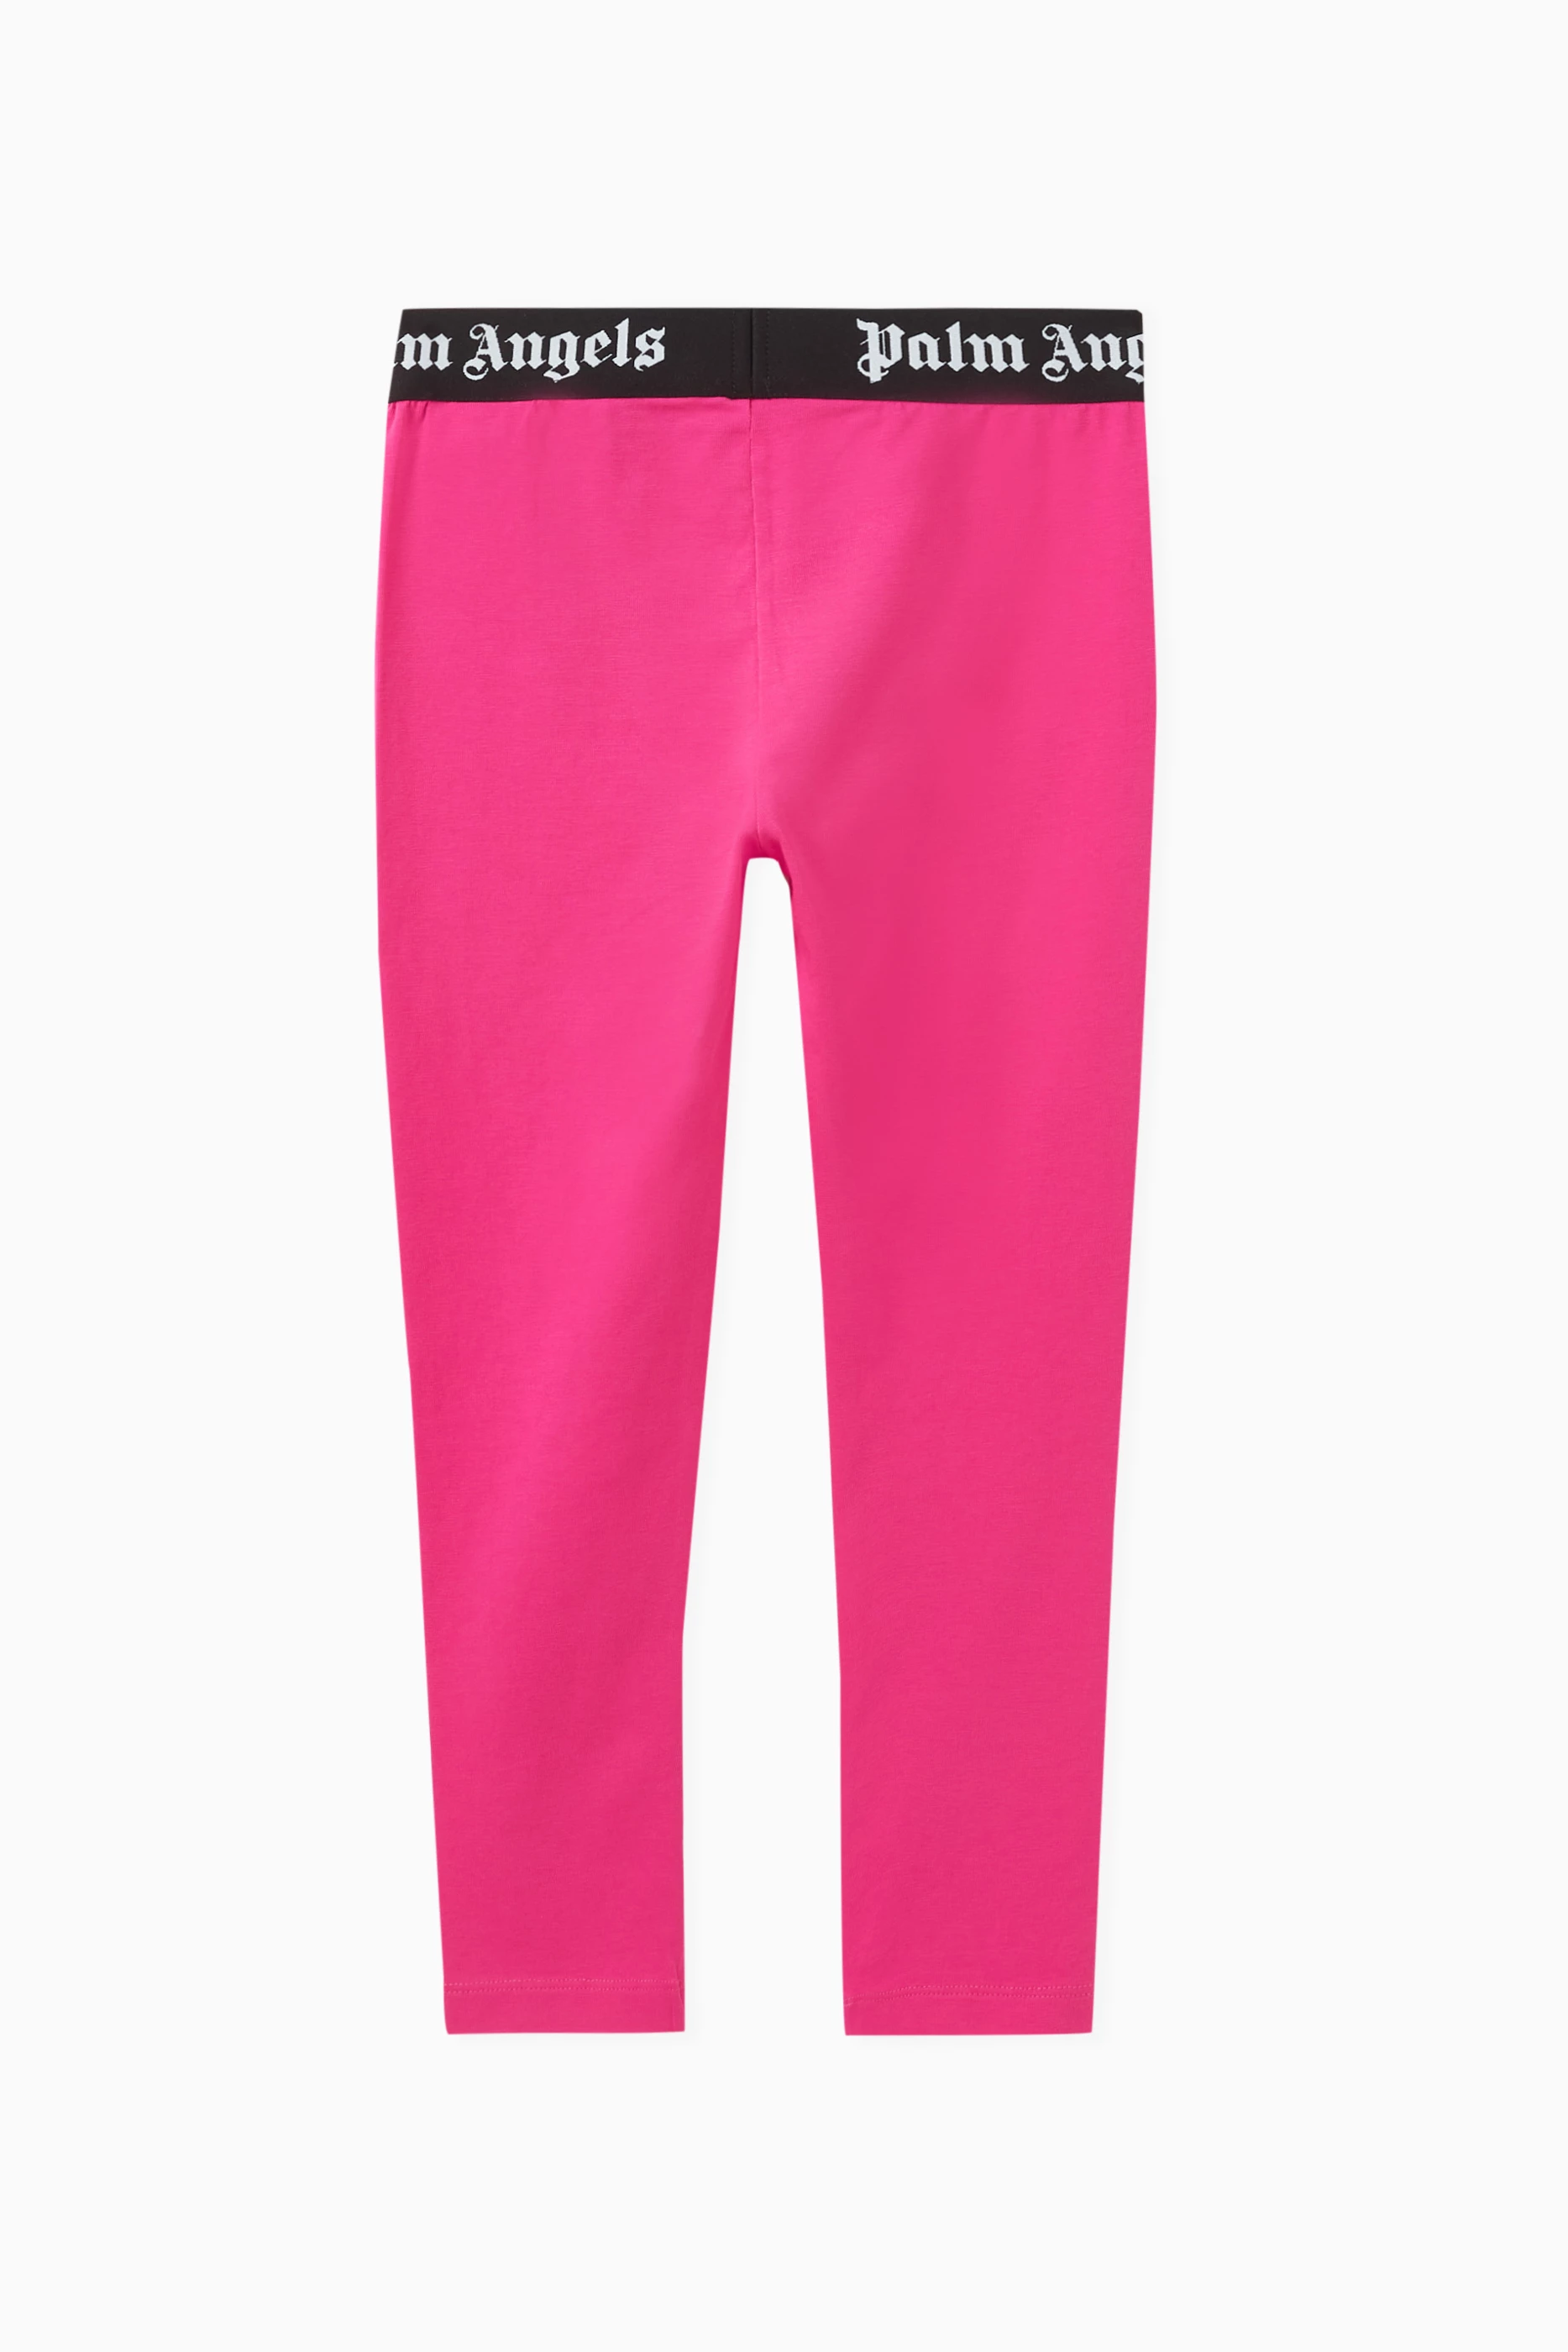 Buy Palm Angels Pink Logo Waistband Leggings in Cotton for Girls